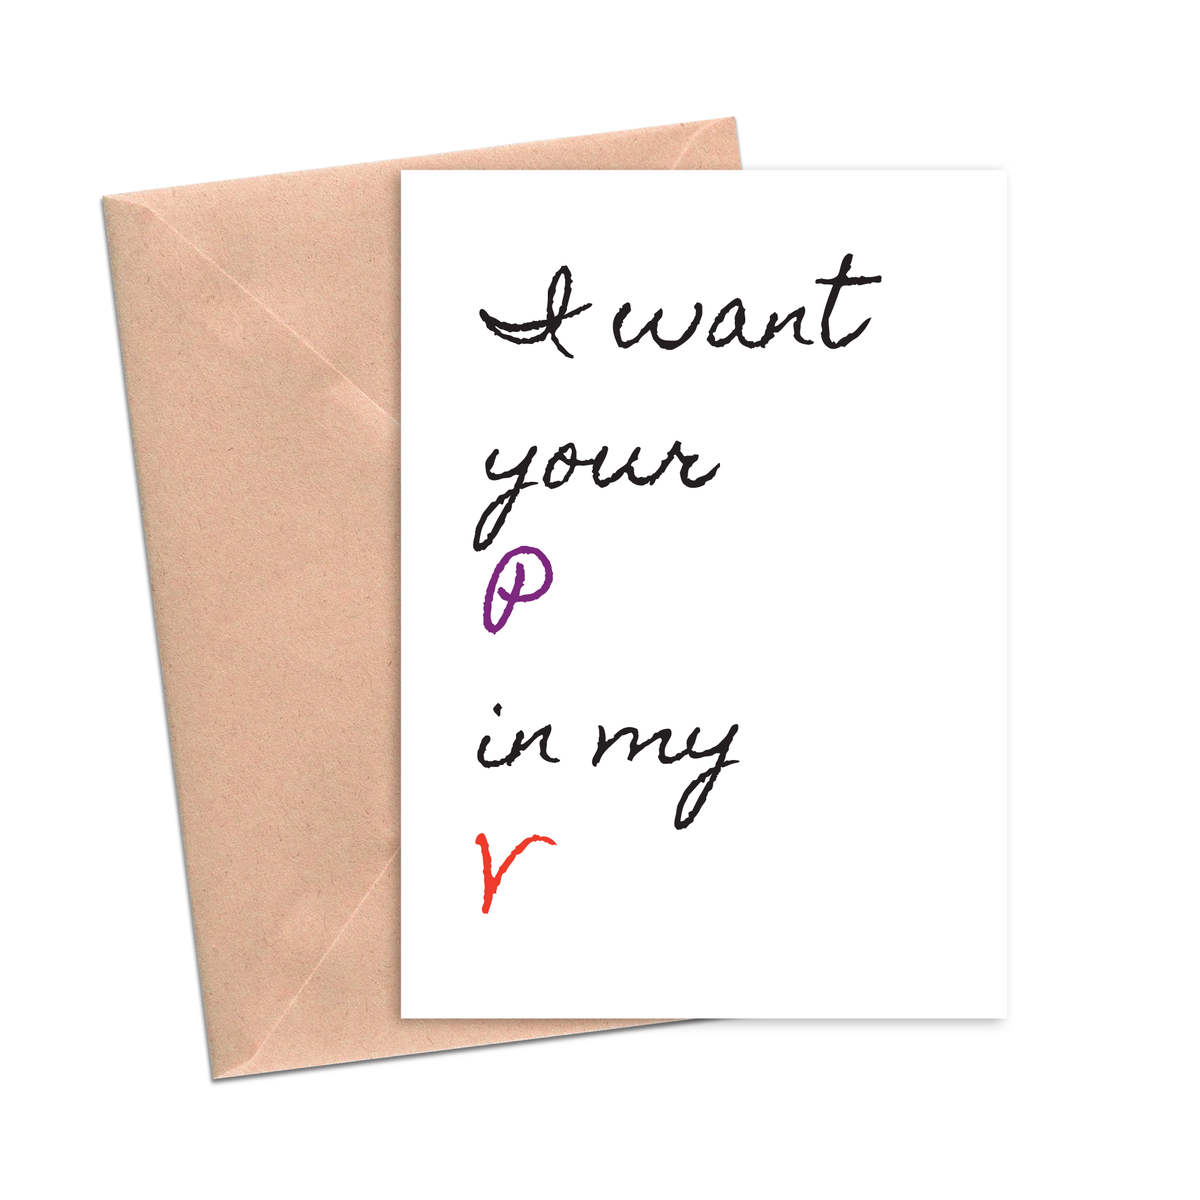 Funny Love Card I Want Your P in my V